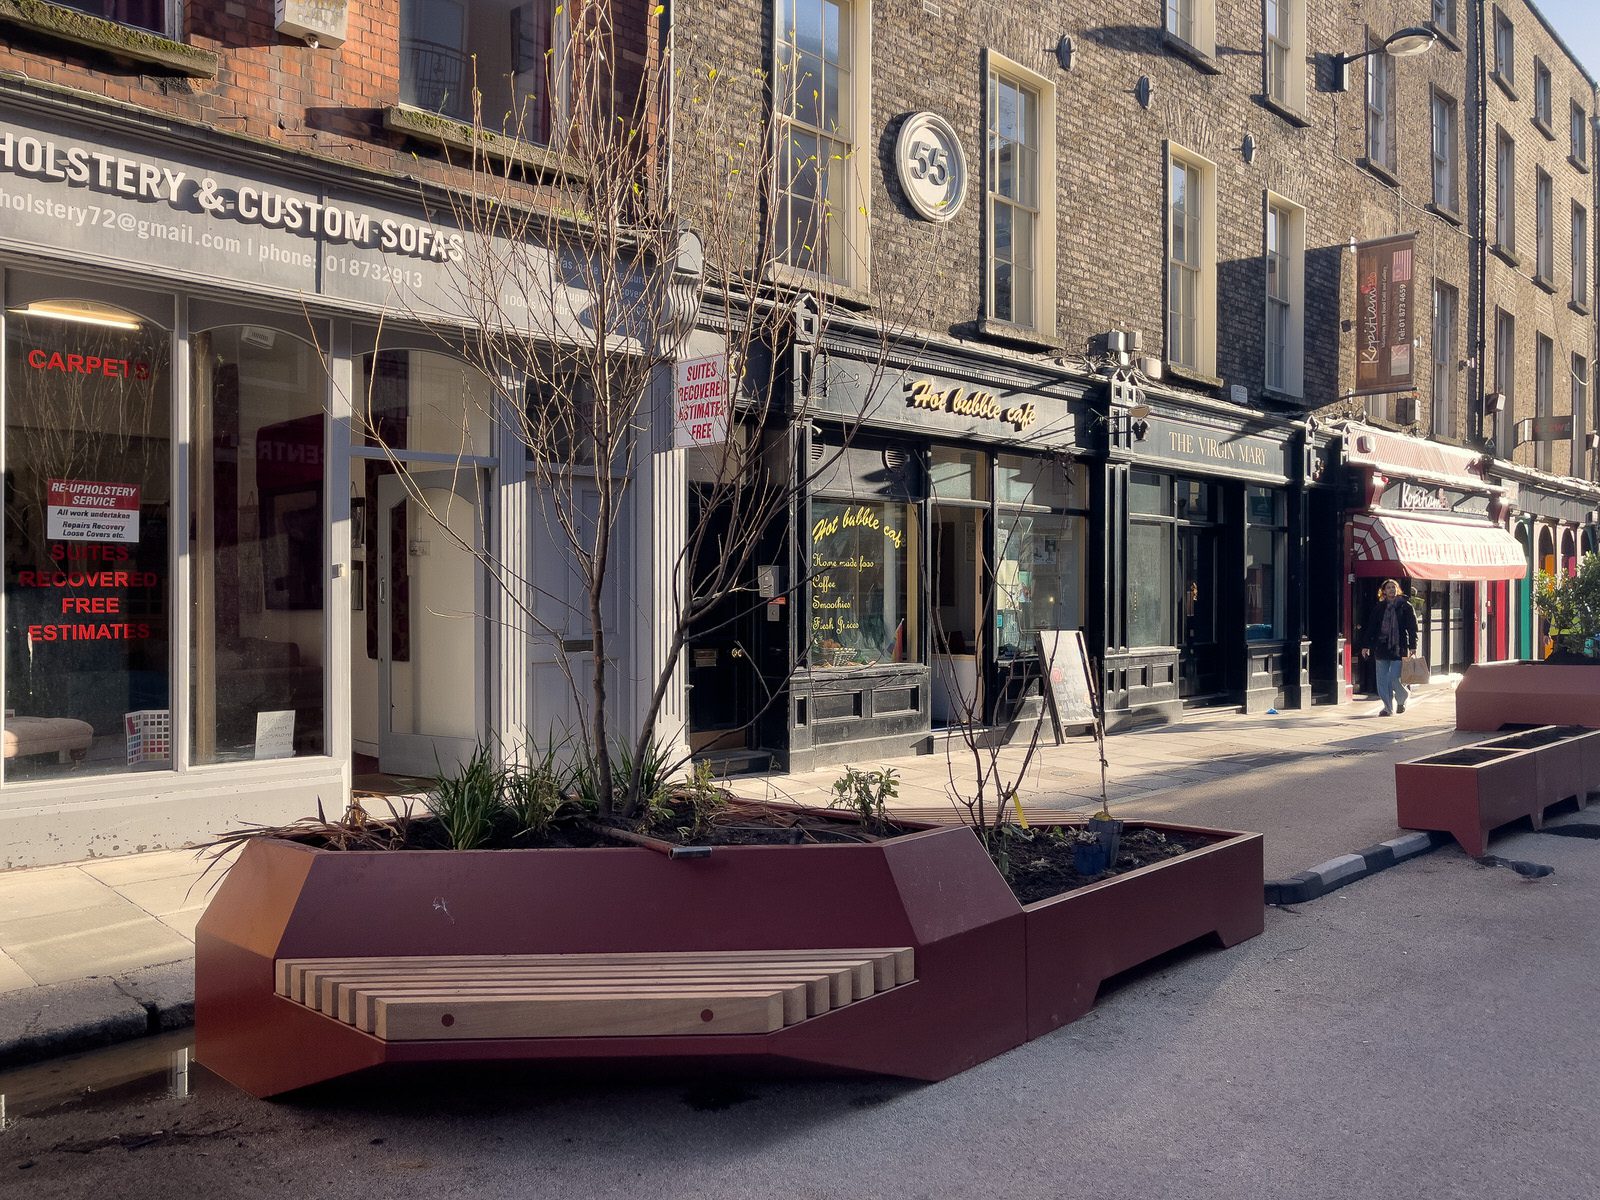 THE NEW STREET FURNITURE AND THE CHRISTMAS TREE [HAVE ARRIVED IN CAPEL STREET]-225855-1